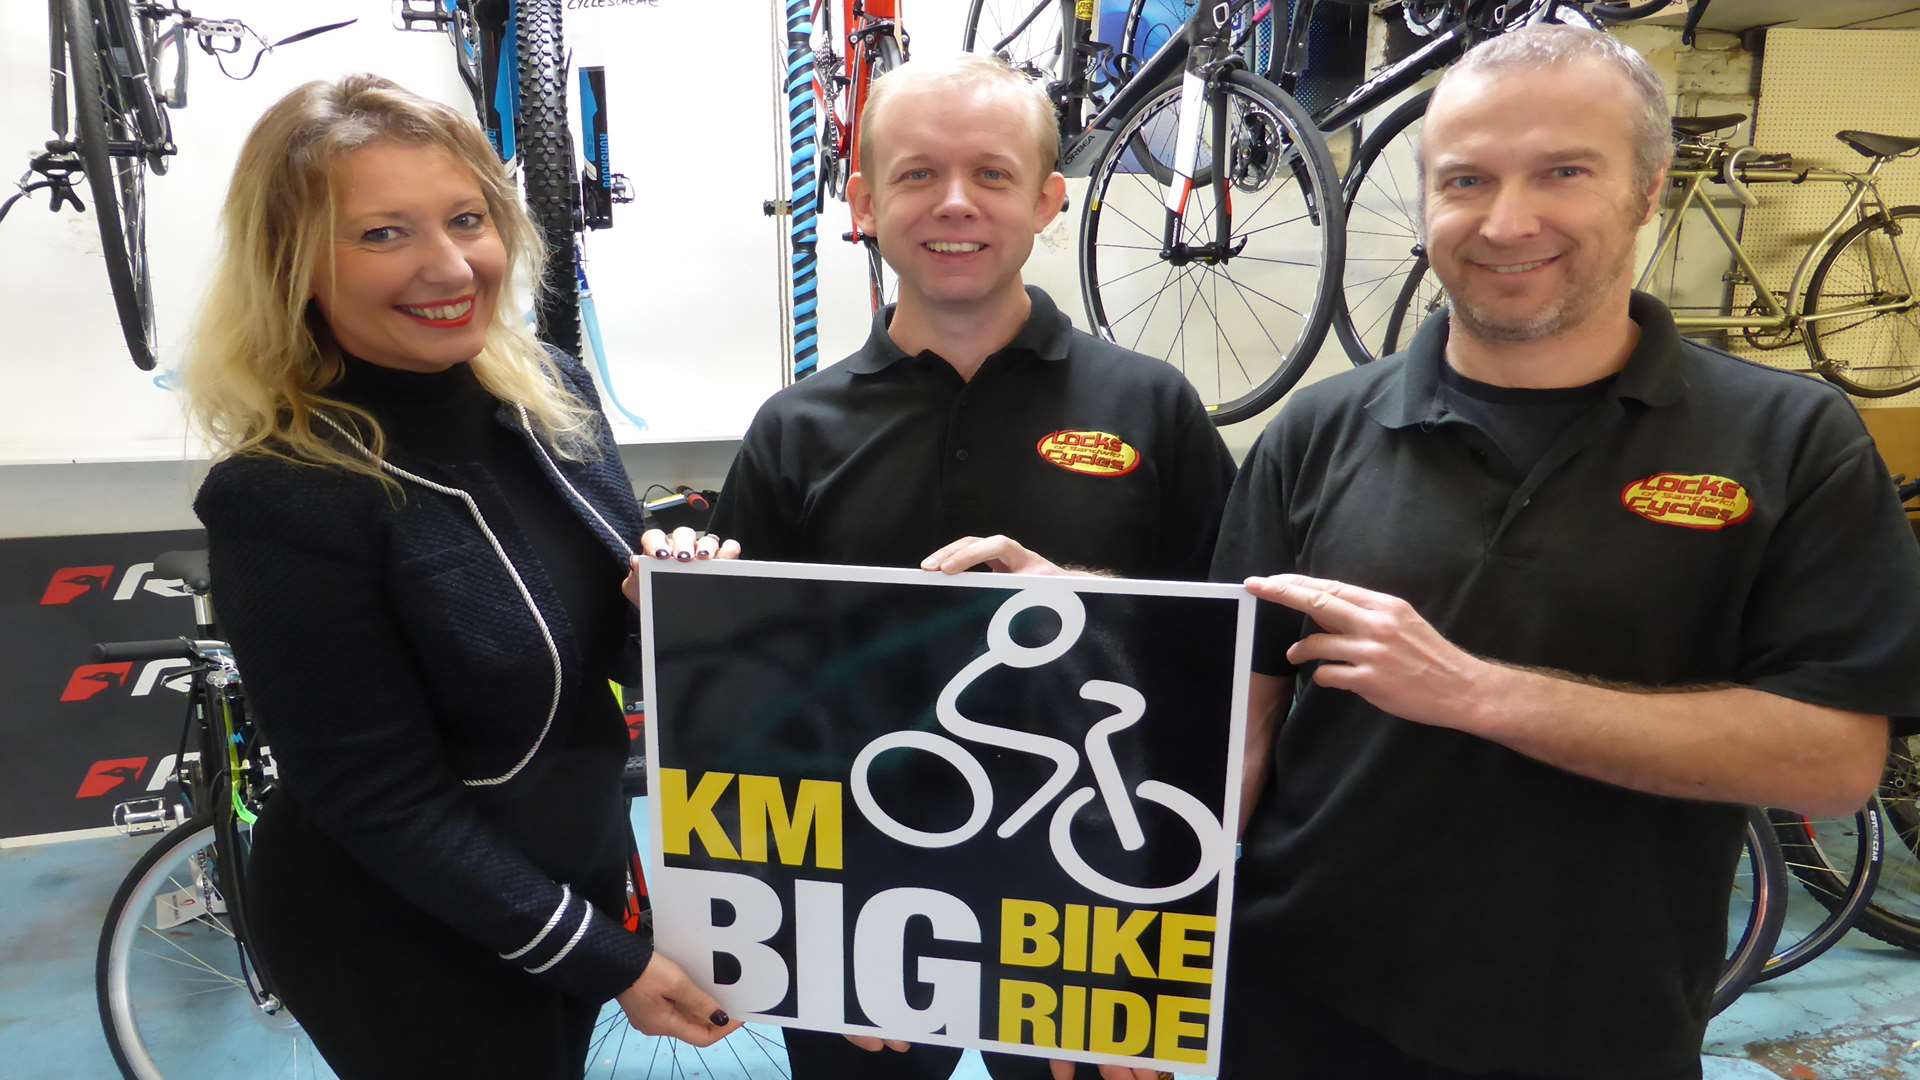 Lisa Craig of the KM Charity Team with Martin Hayes and Andy Croucher of Locks of Sandwich Cycles, which is the official 100K cycling event partner of the KM Big Bike Ride 2016.